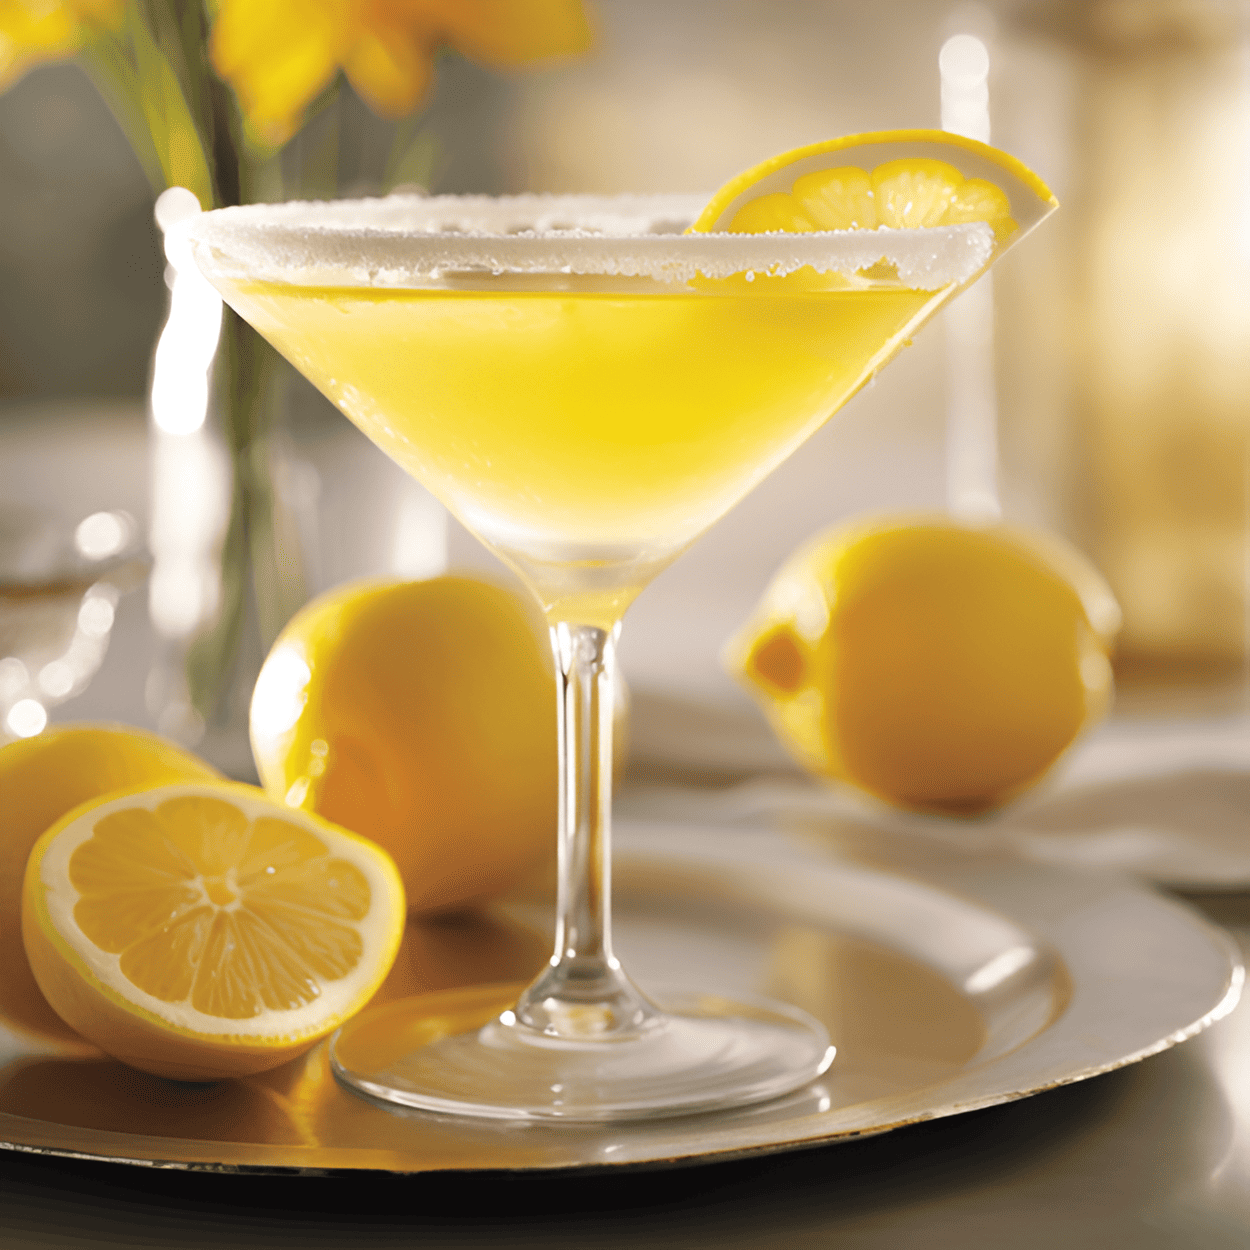 Lemon Drop Martini Cocktail Recipe - The Lemon Drop Martini has a bright, zesty, and slightly sweet taste. The combination of lemon juice and simple syrup creates a perfect balance of sour and sweet, while the vodka adds a smooth and strong kick. The sugar rim adds an extra touch of sweetness to each sip.